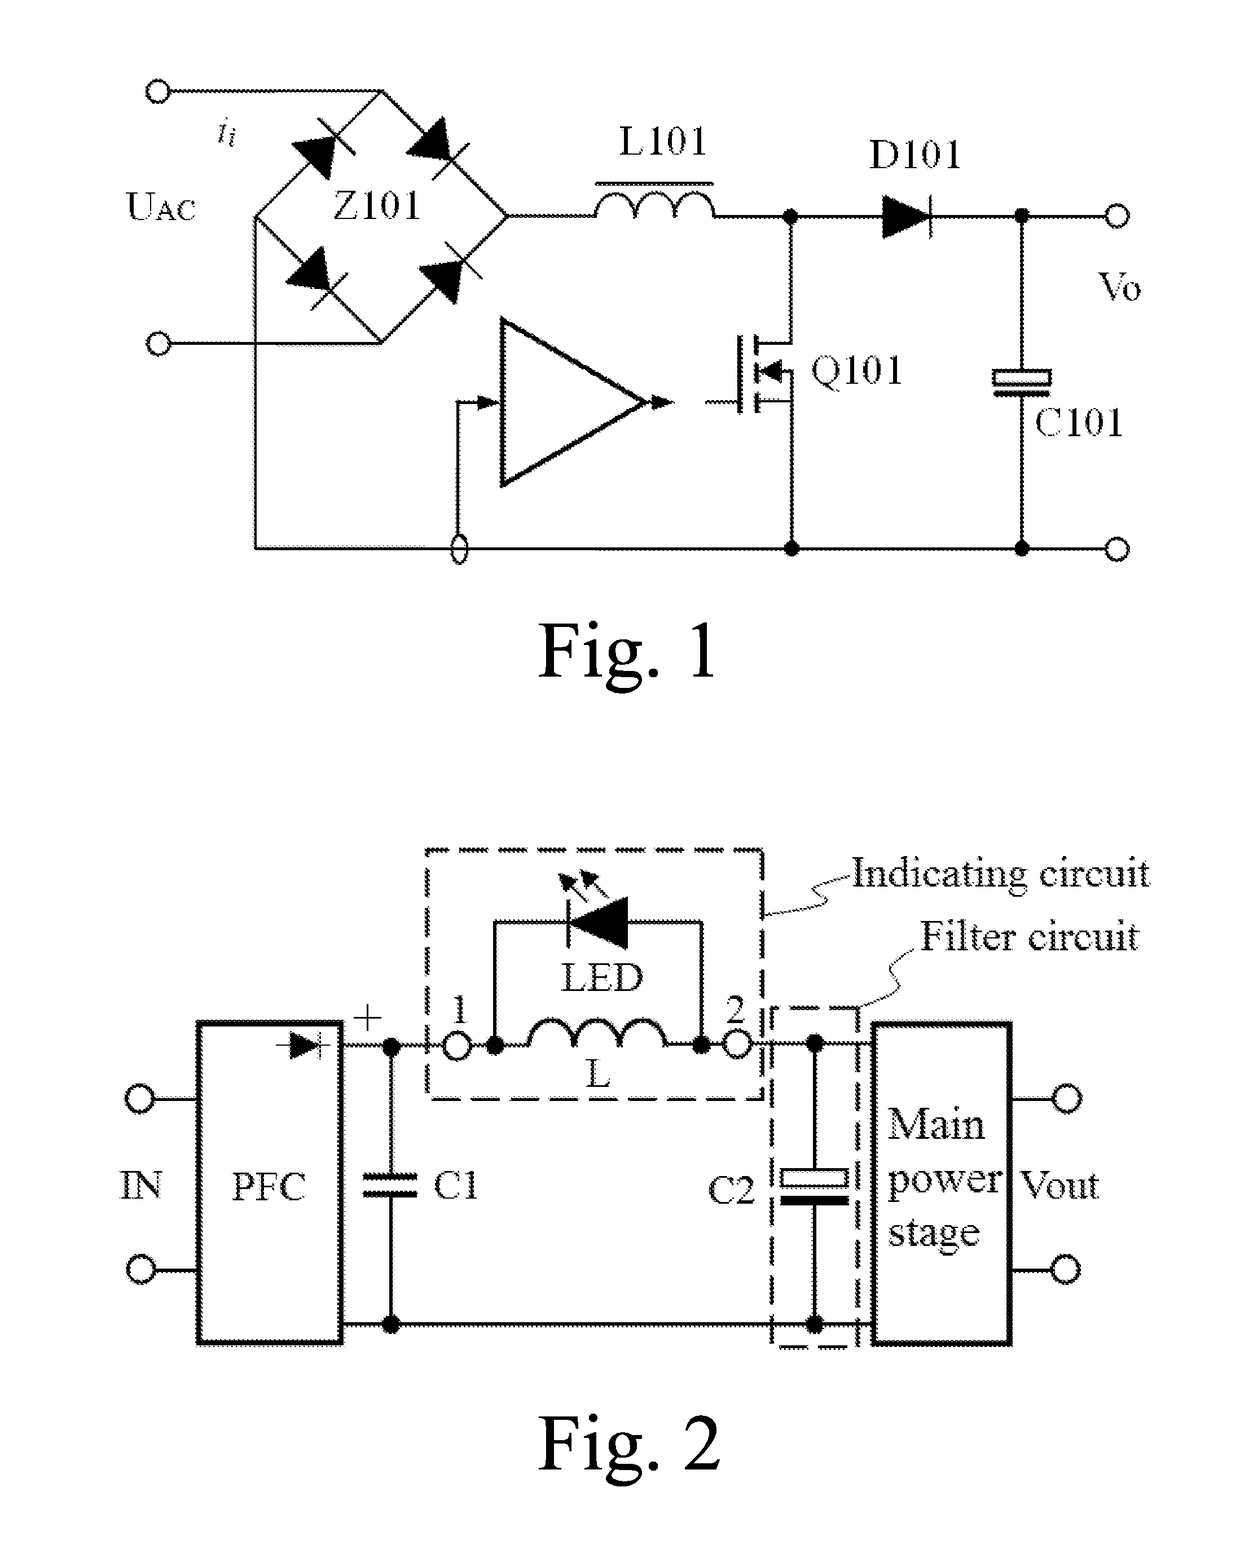 Switching power supply having active power factor correction